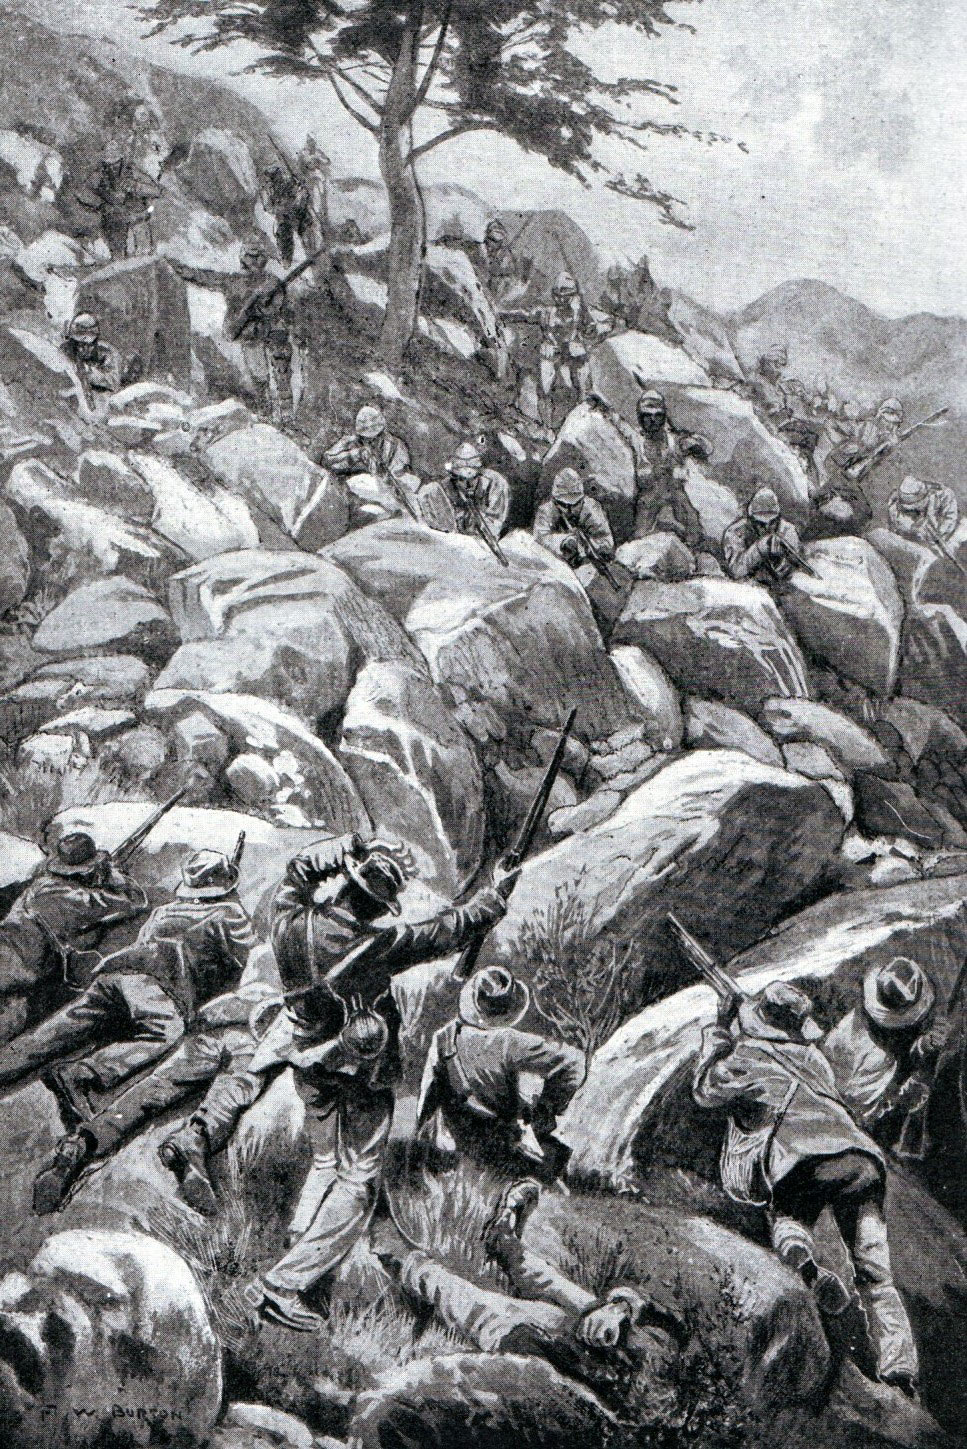 oer attack on Caesar's Camp on 6th January 1900: Siege of Ladysmith, 2nd November 1899 to 27th February 1900 in the Great Boer War: picture by W. Burton